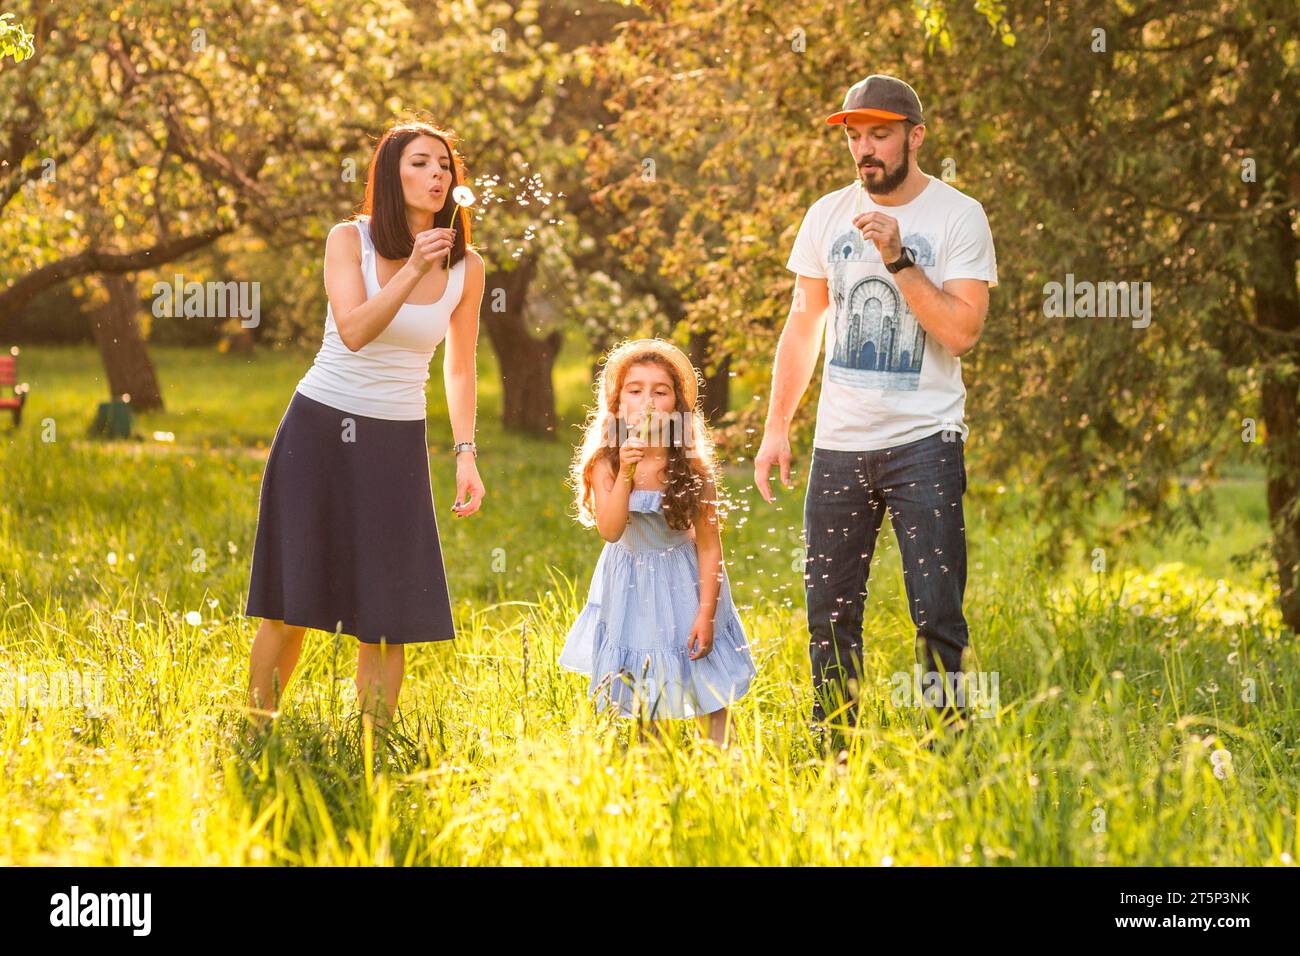 Daughter blowing dandelion with her parents Stock Photo